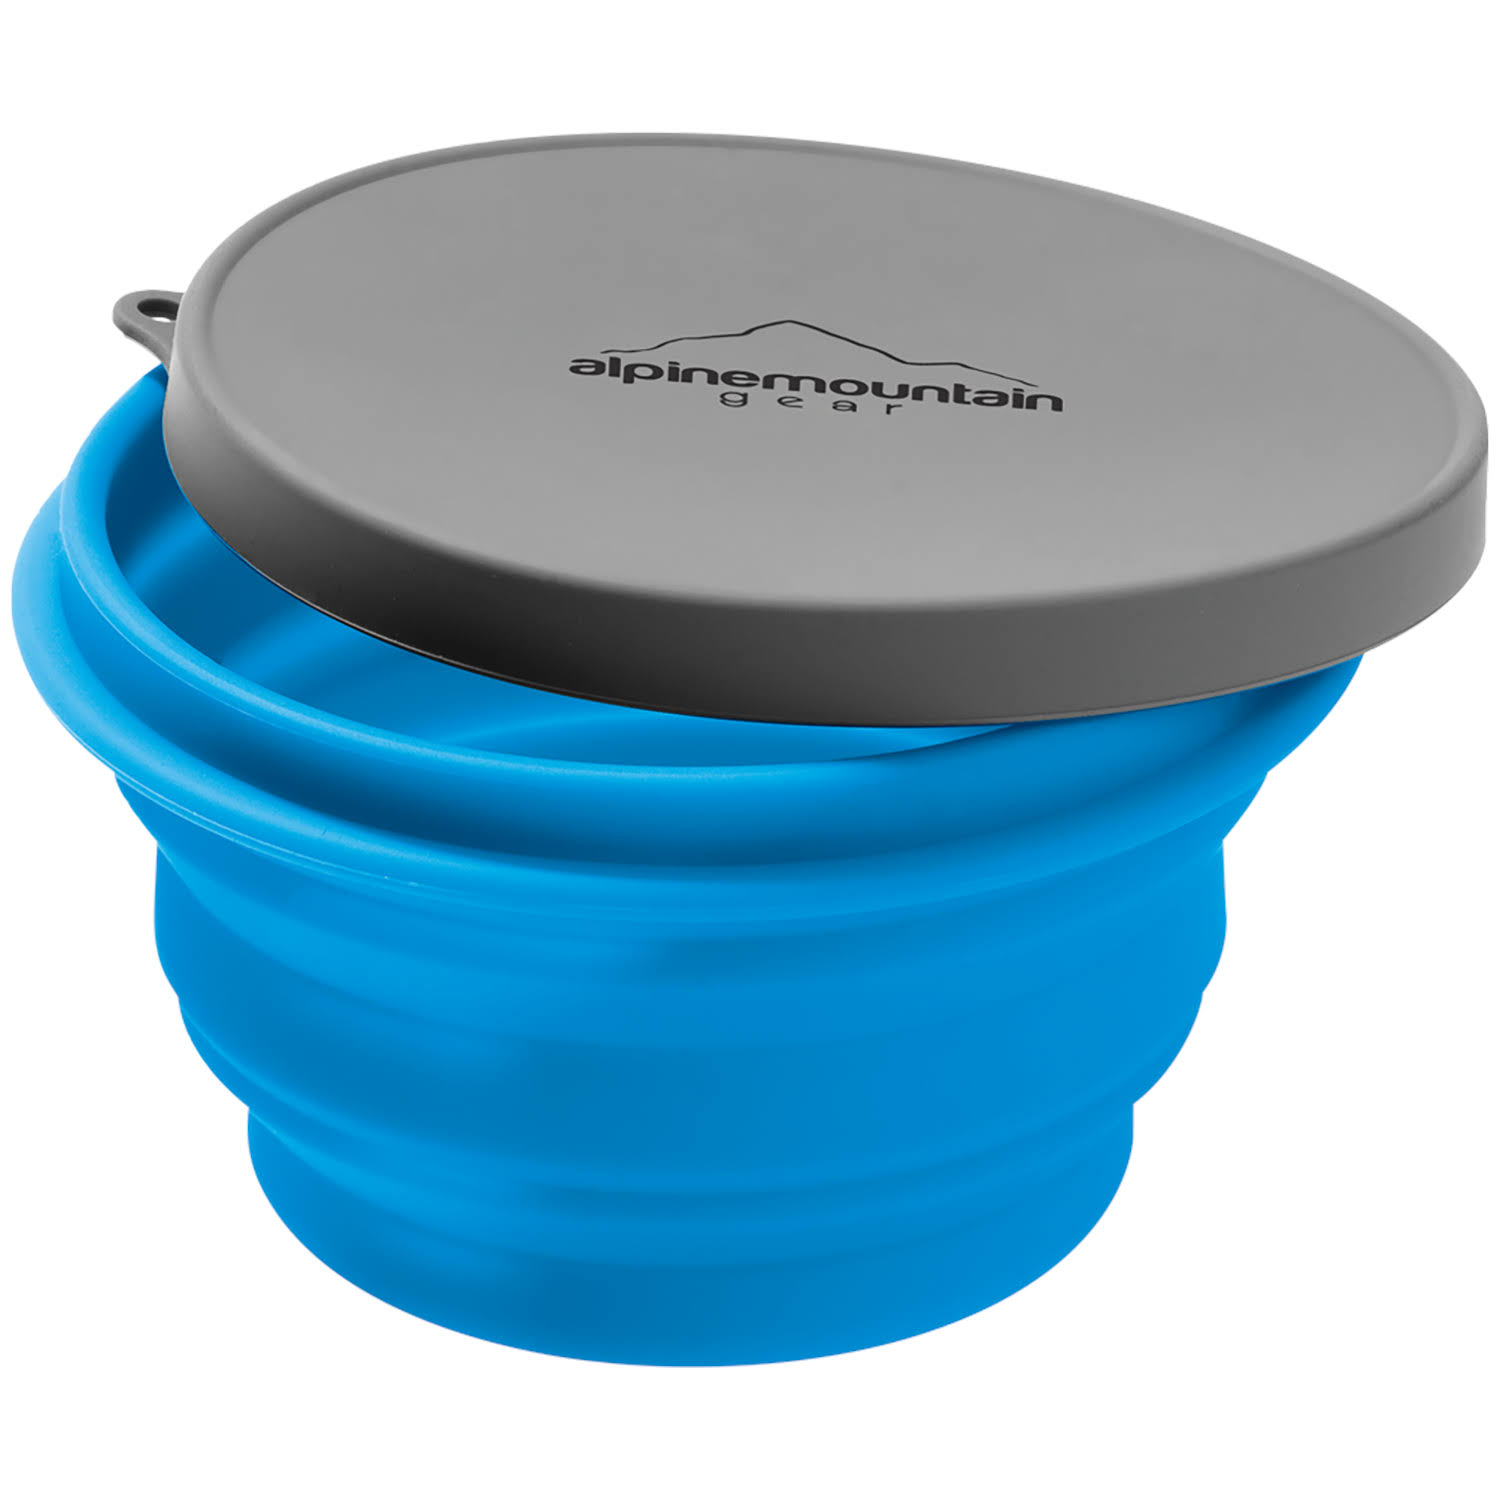 Alpine Mountain Gear Collapsible Silicone Bowl - Blue, Large